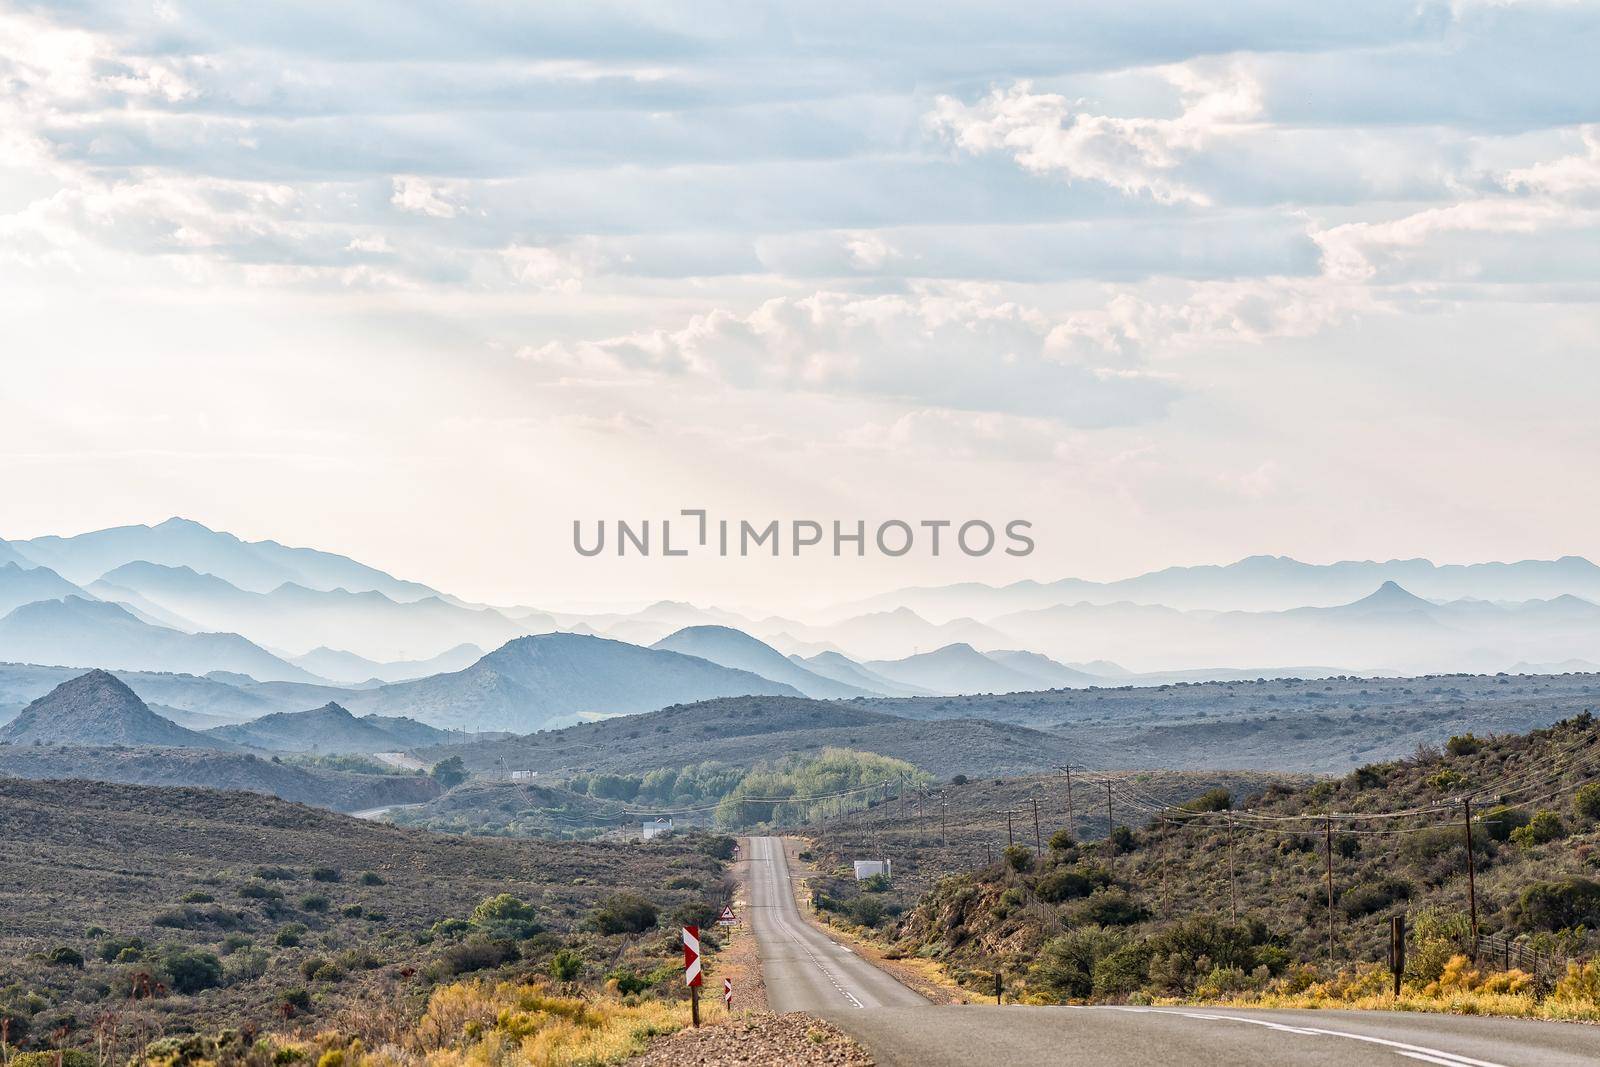 A hazy view from road R407 towards Klaarstroom. The Swartberg Mountains are visible